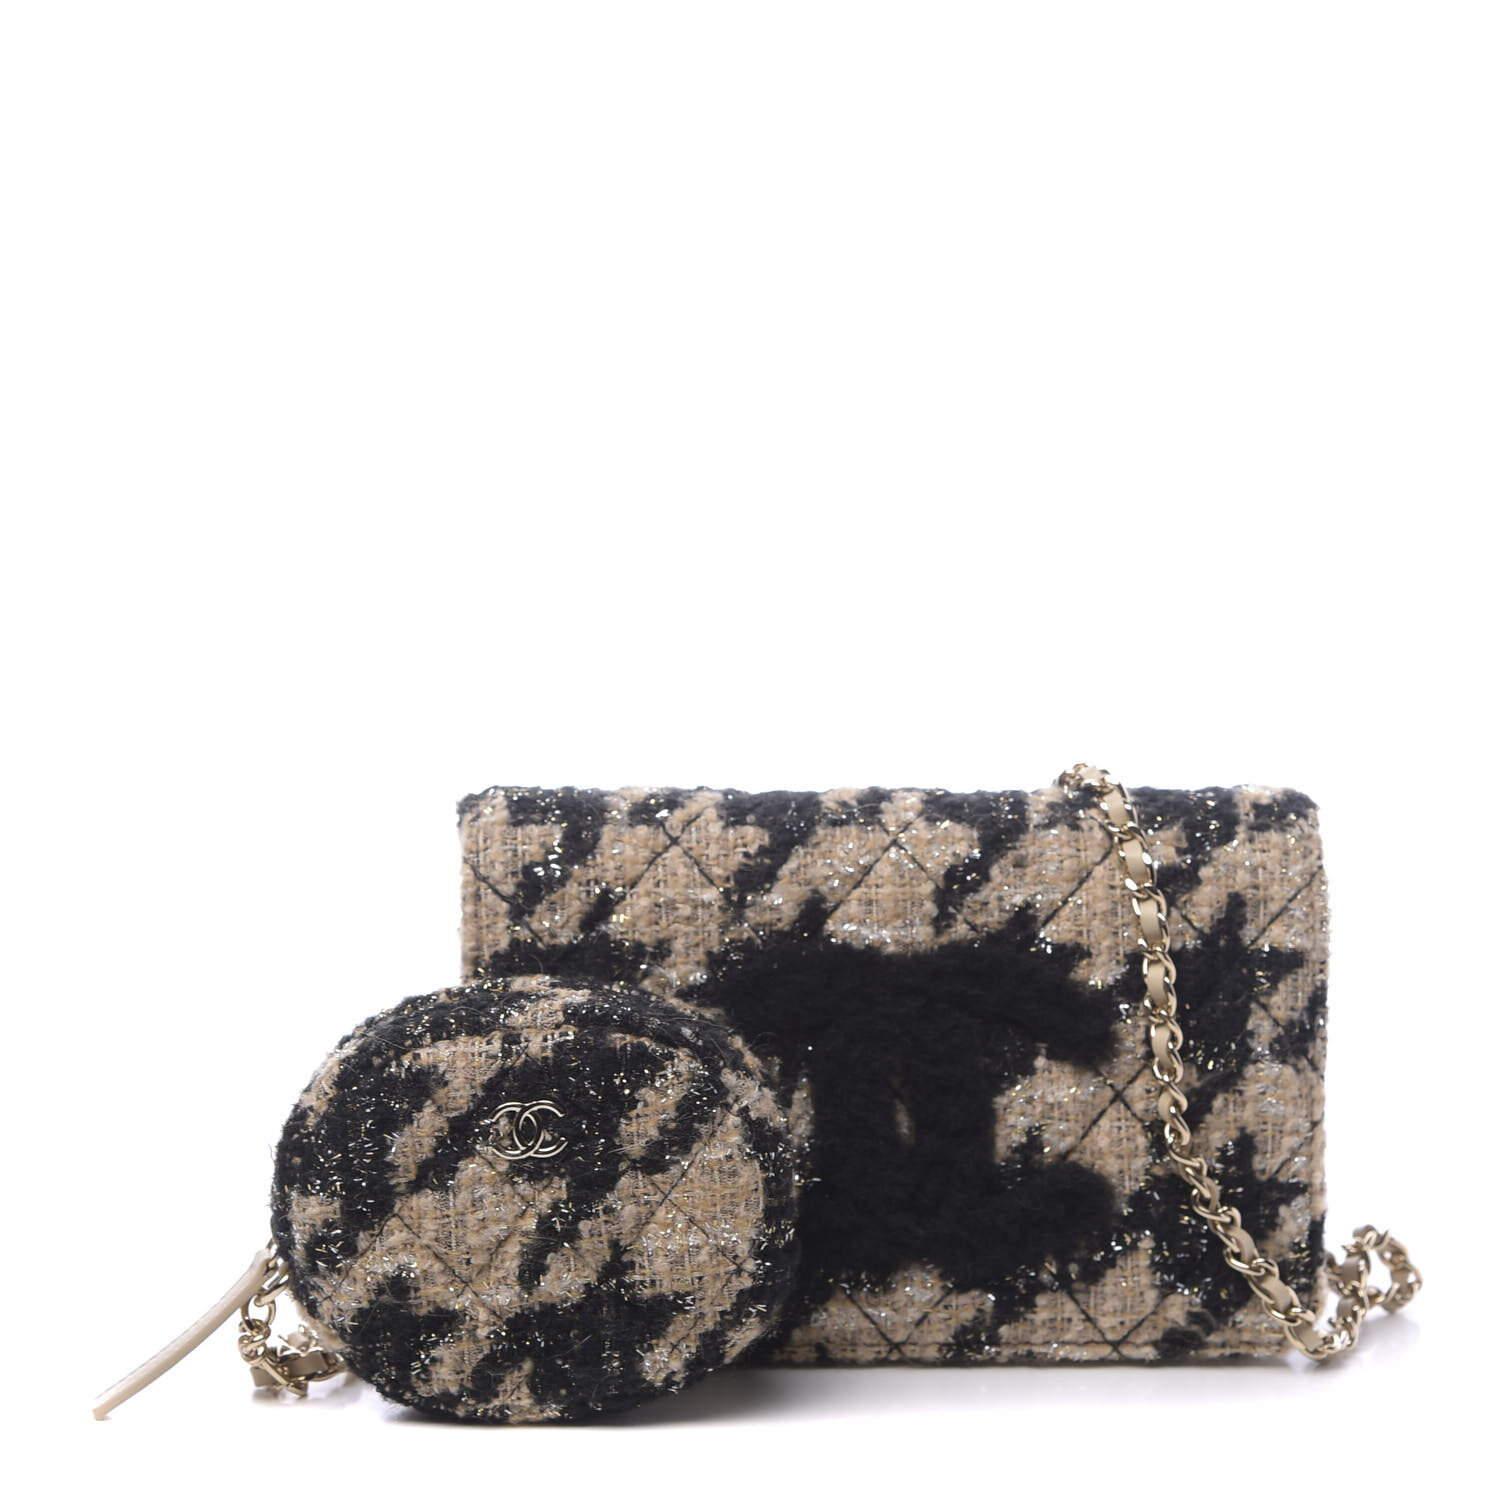 Chanel Tweed Shearling Quilted Wallet Bag with Coin Purse.jpg